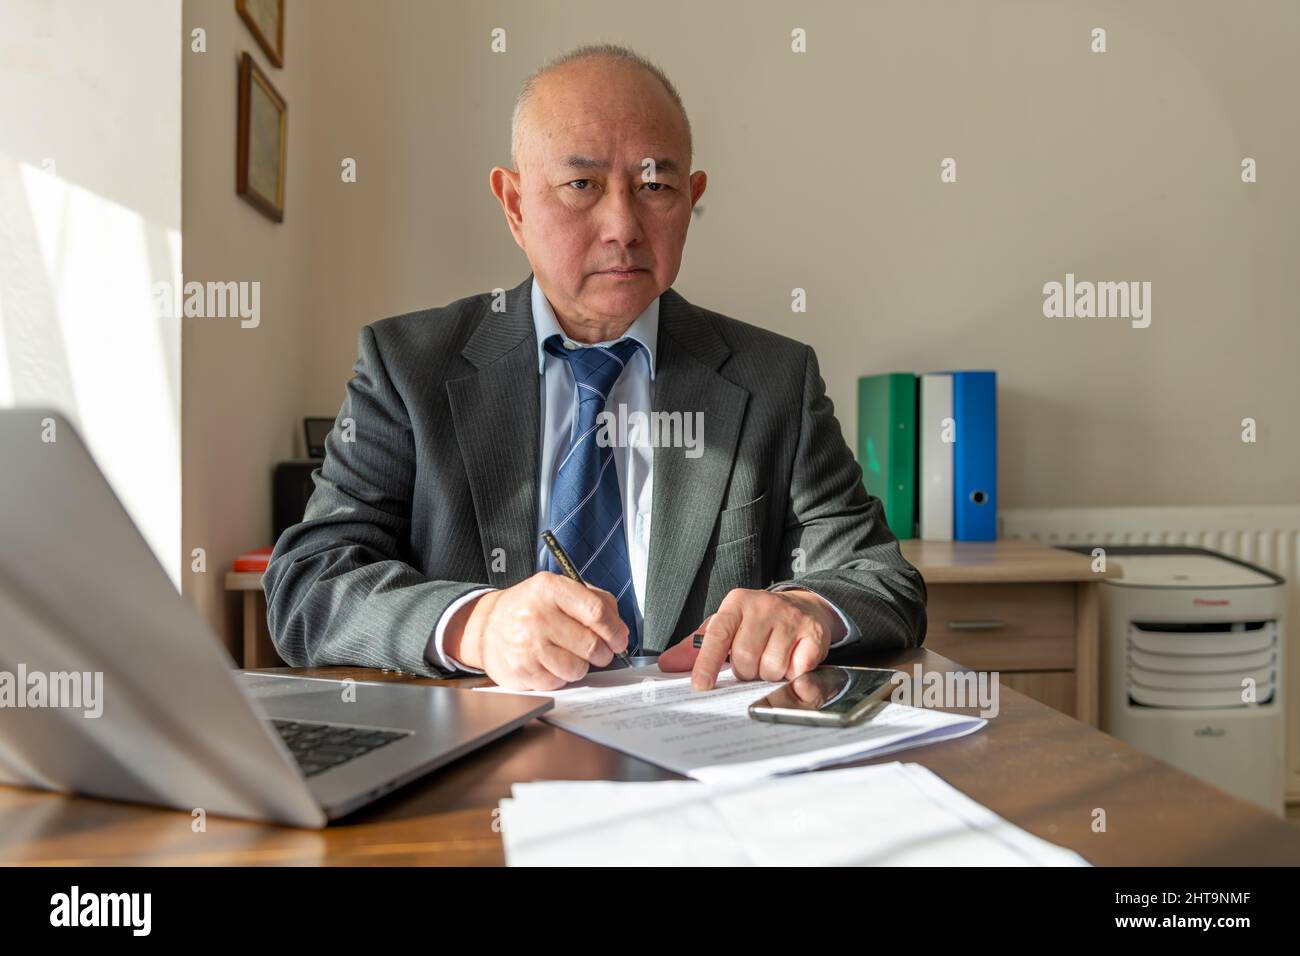 A senior executive signing a document in the office. Work, office concept. Stock Photo